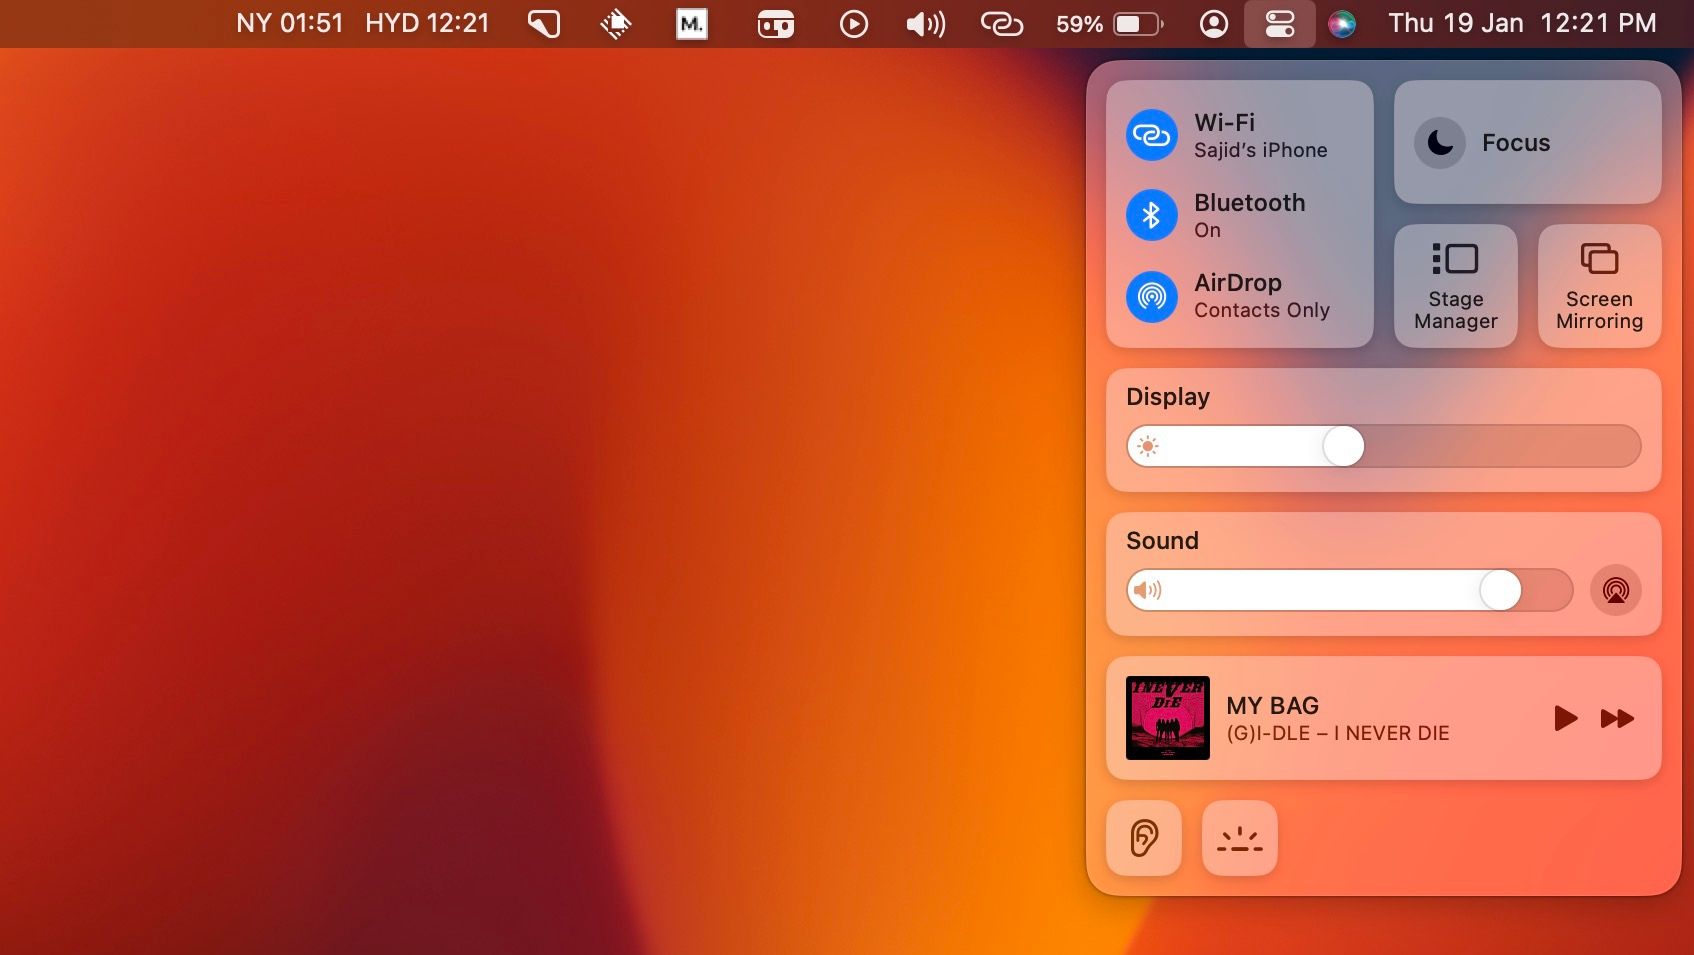 turn on wi-fi and bluetooth from macOS control center